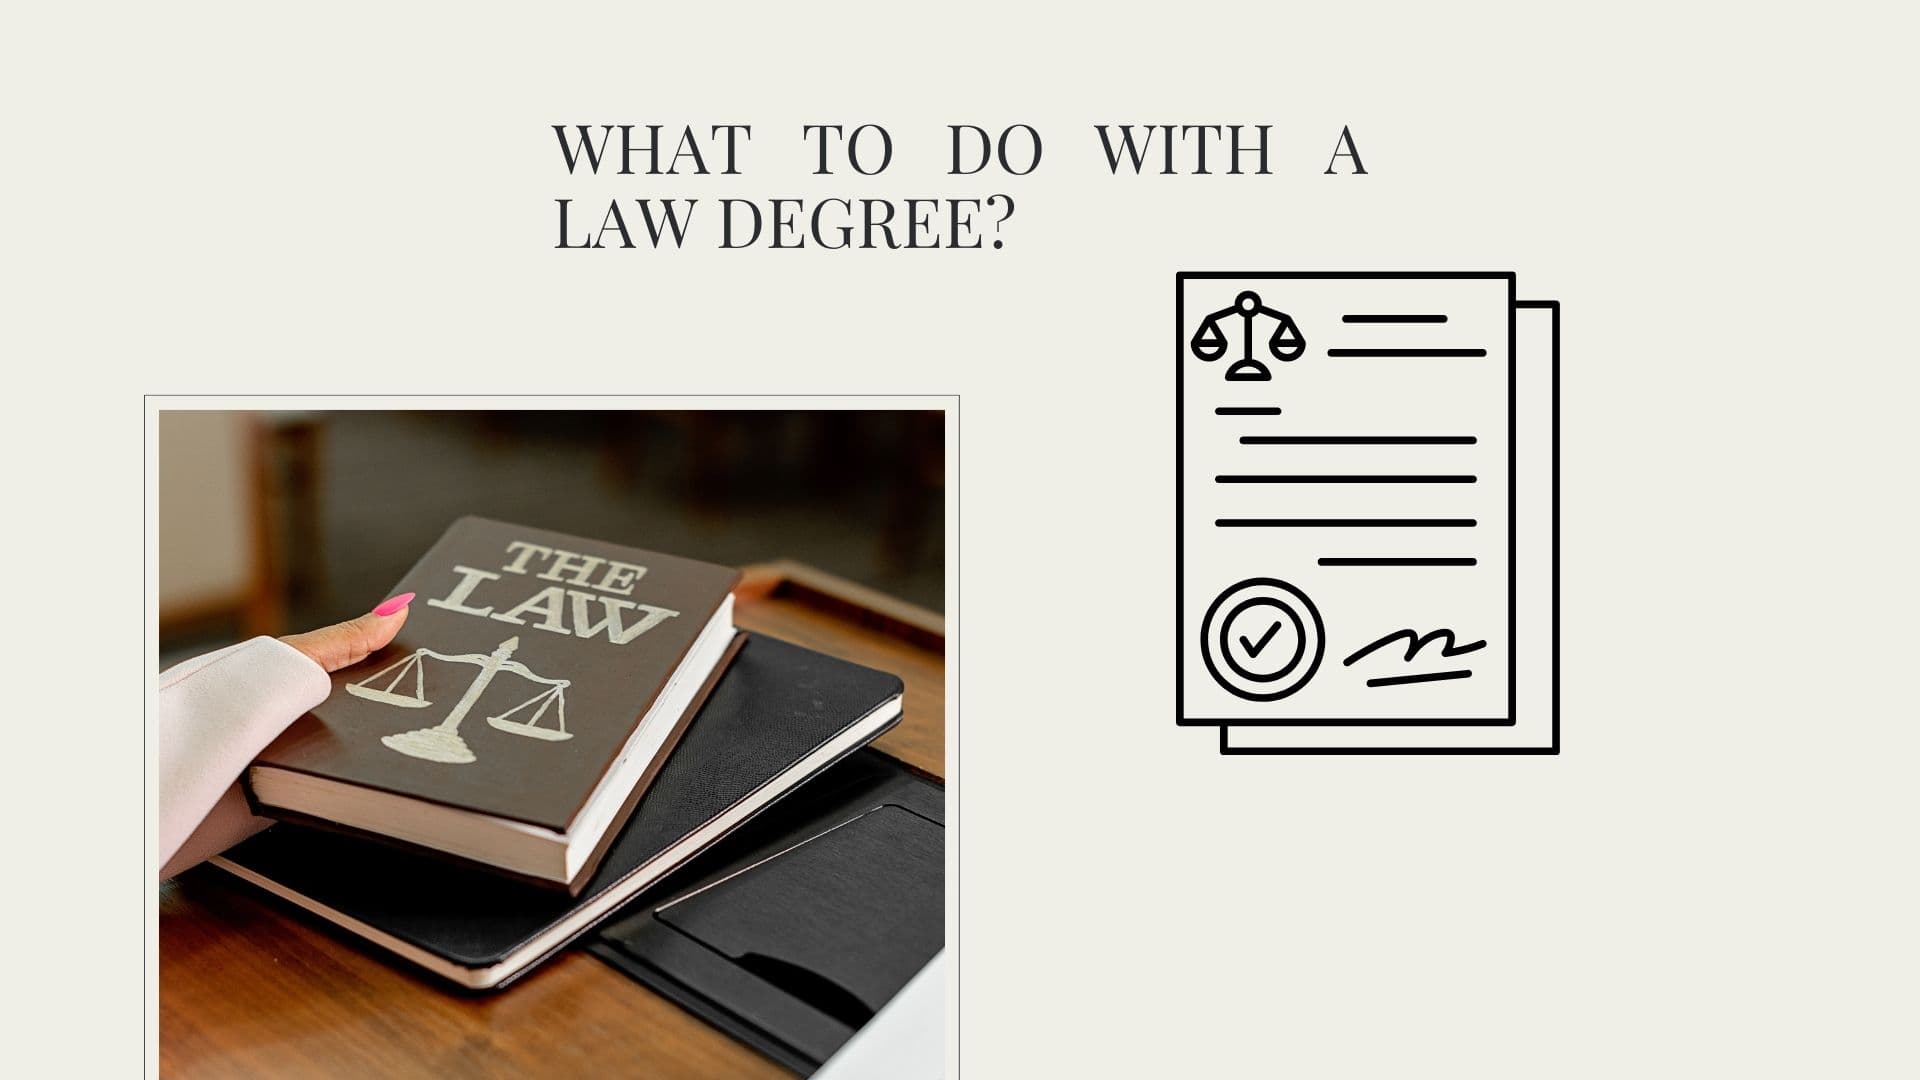 What Can I Do With a Law Degree